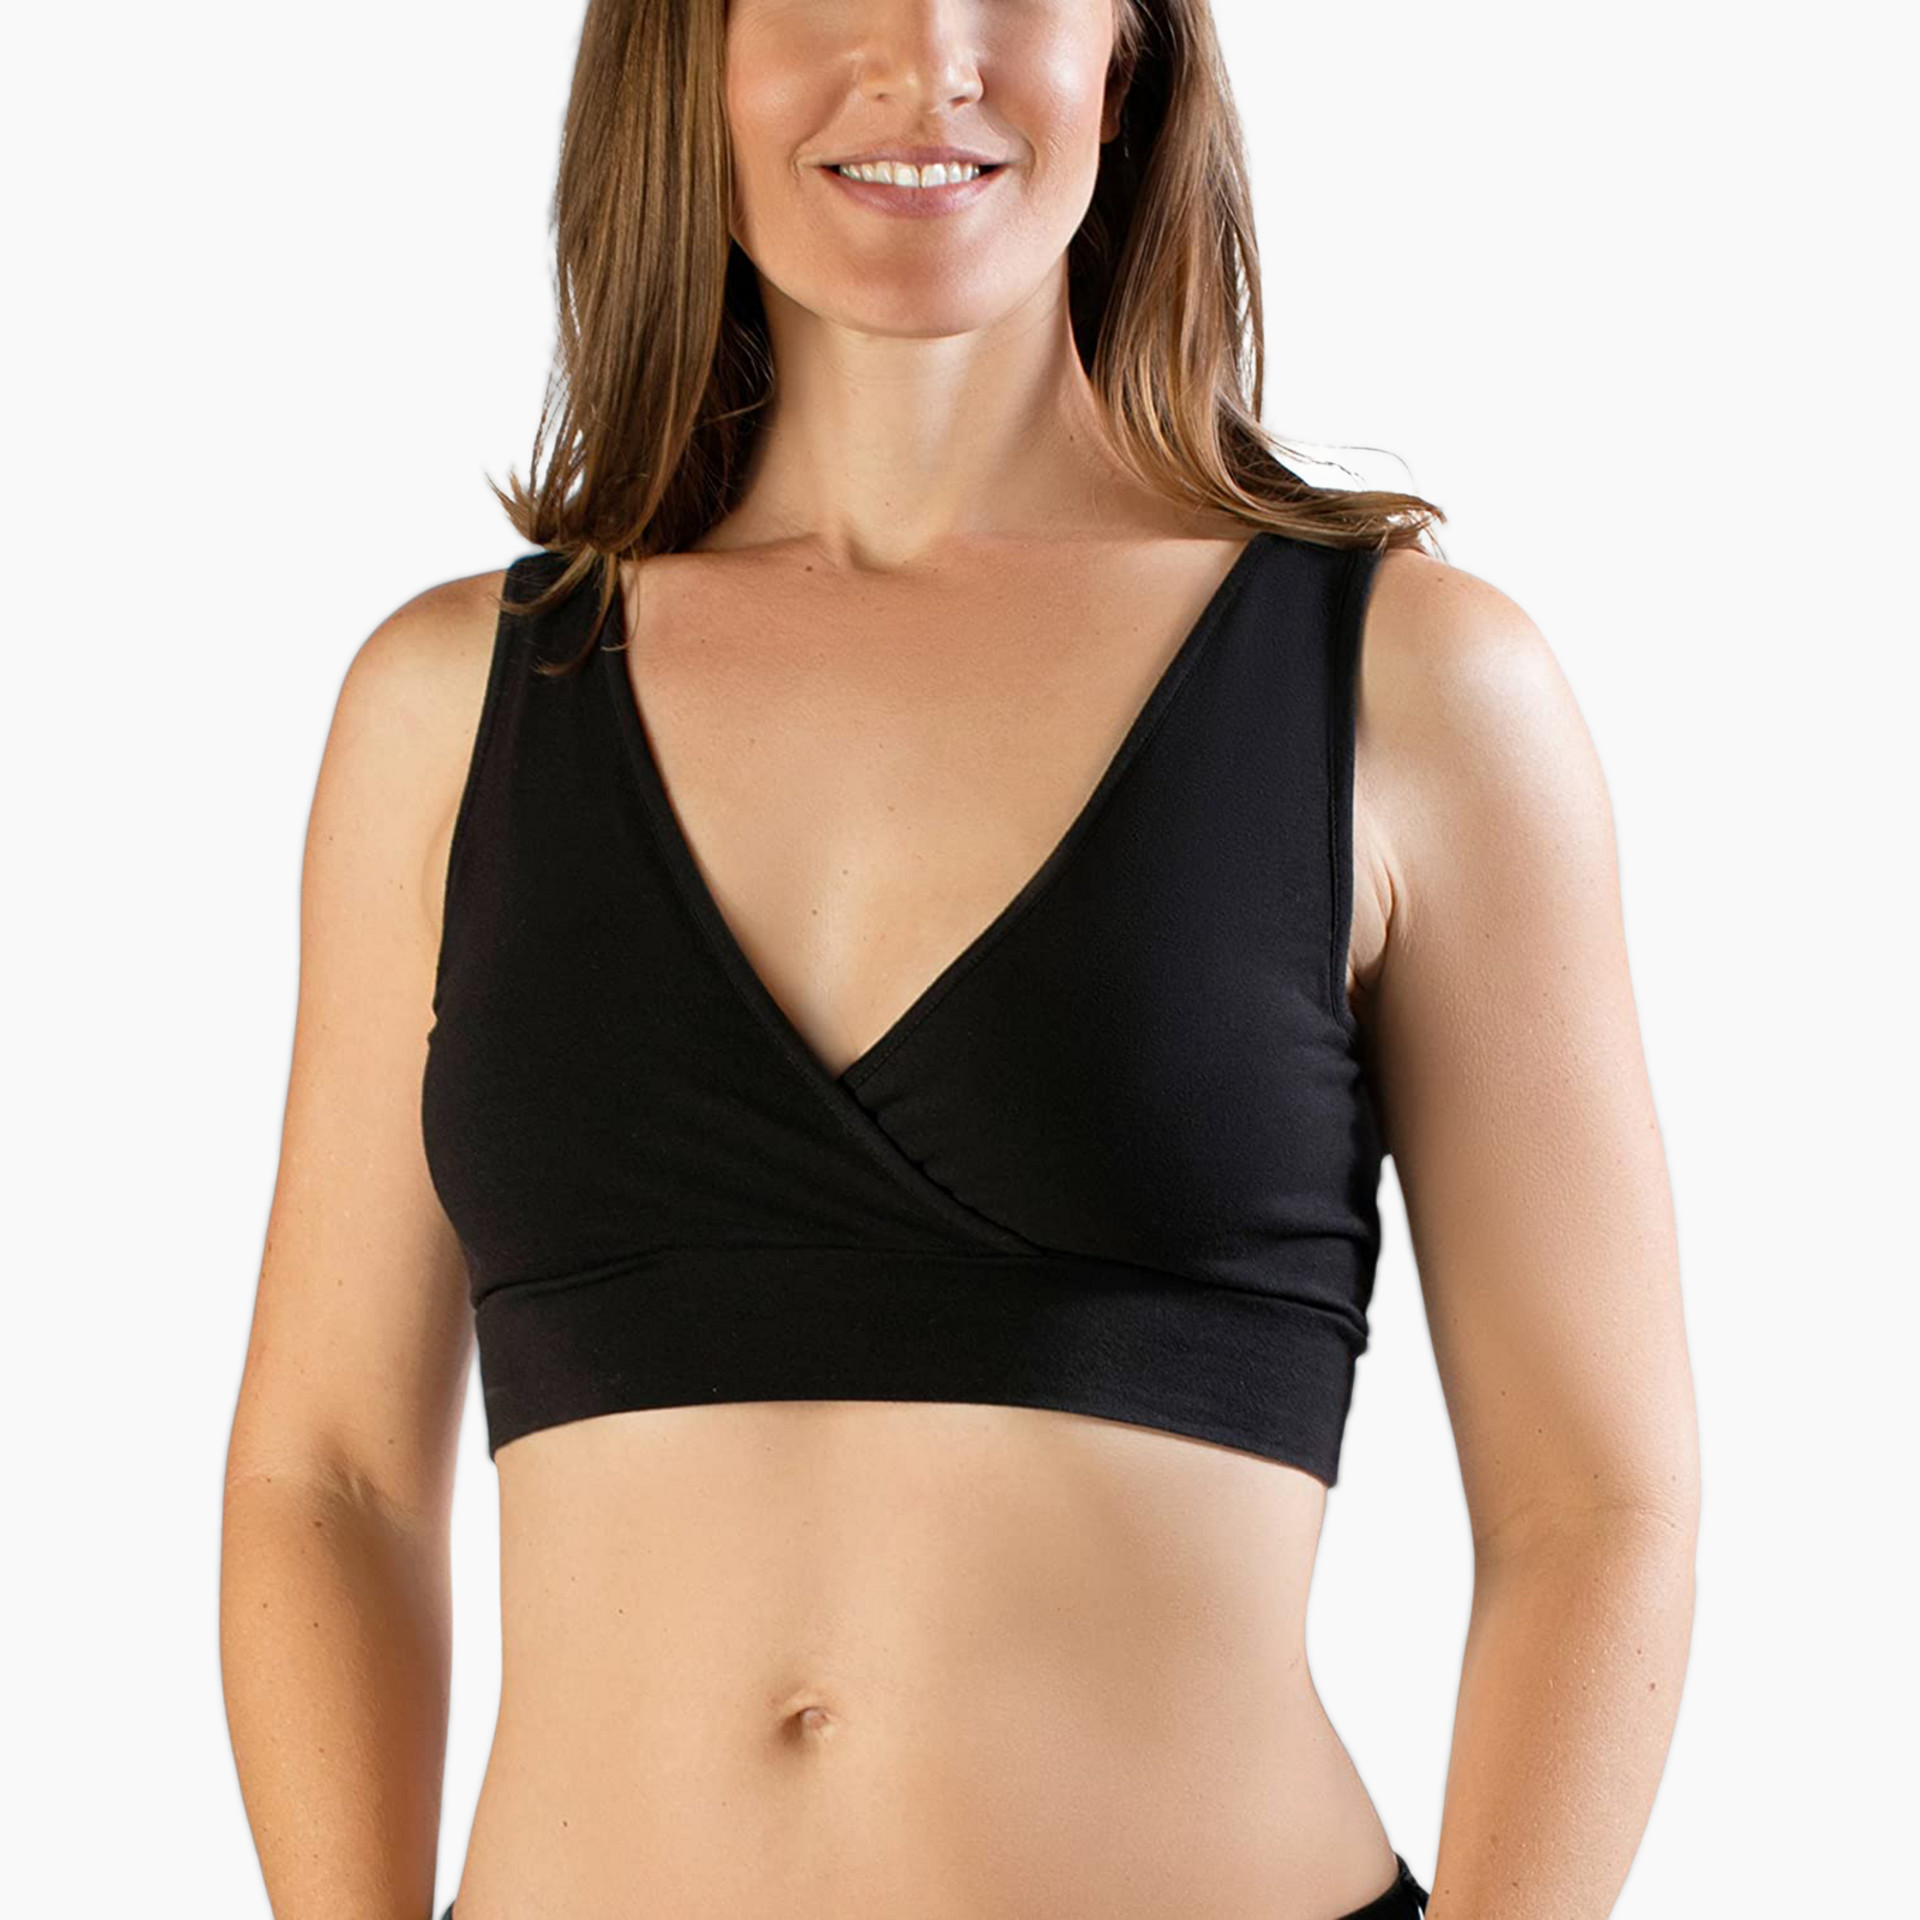 Buy Kindred Bravely French Terry Racerback Busty Nursing Bra for E, F, G,  H, I Cup